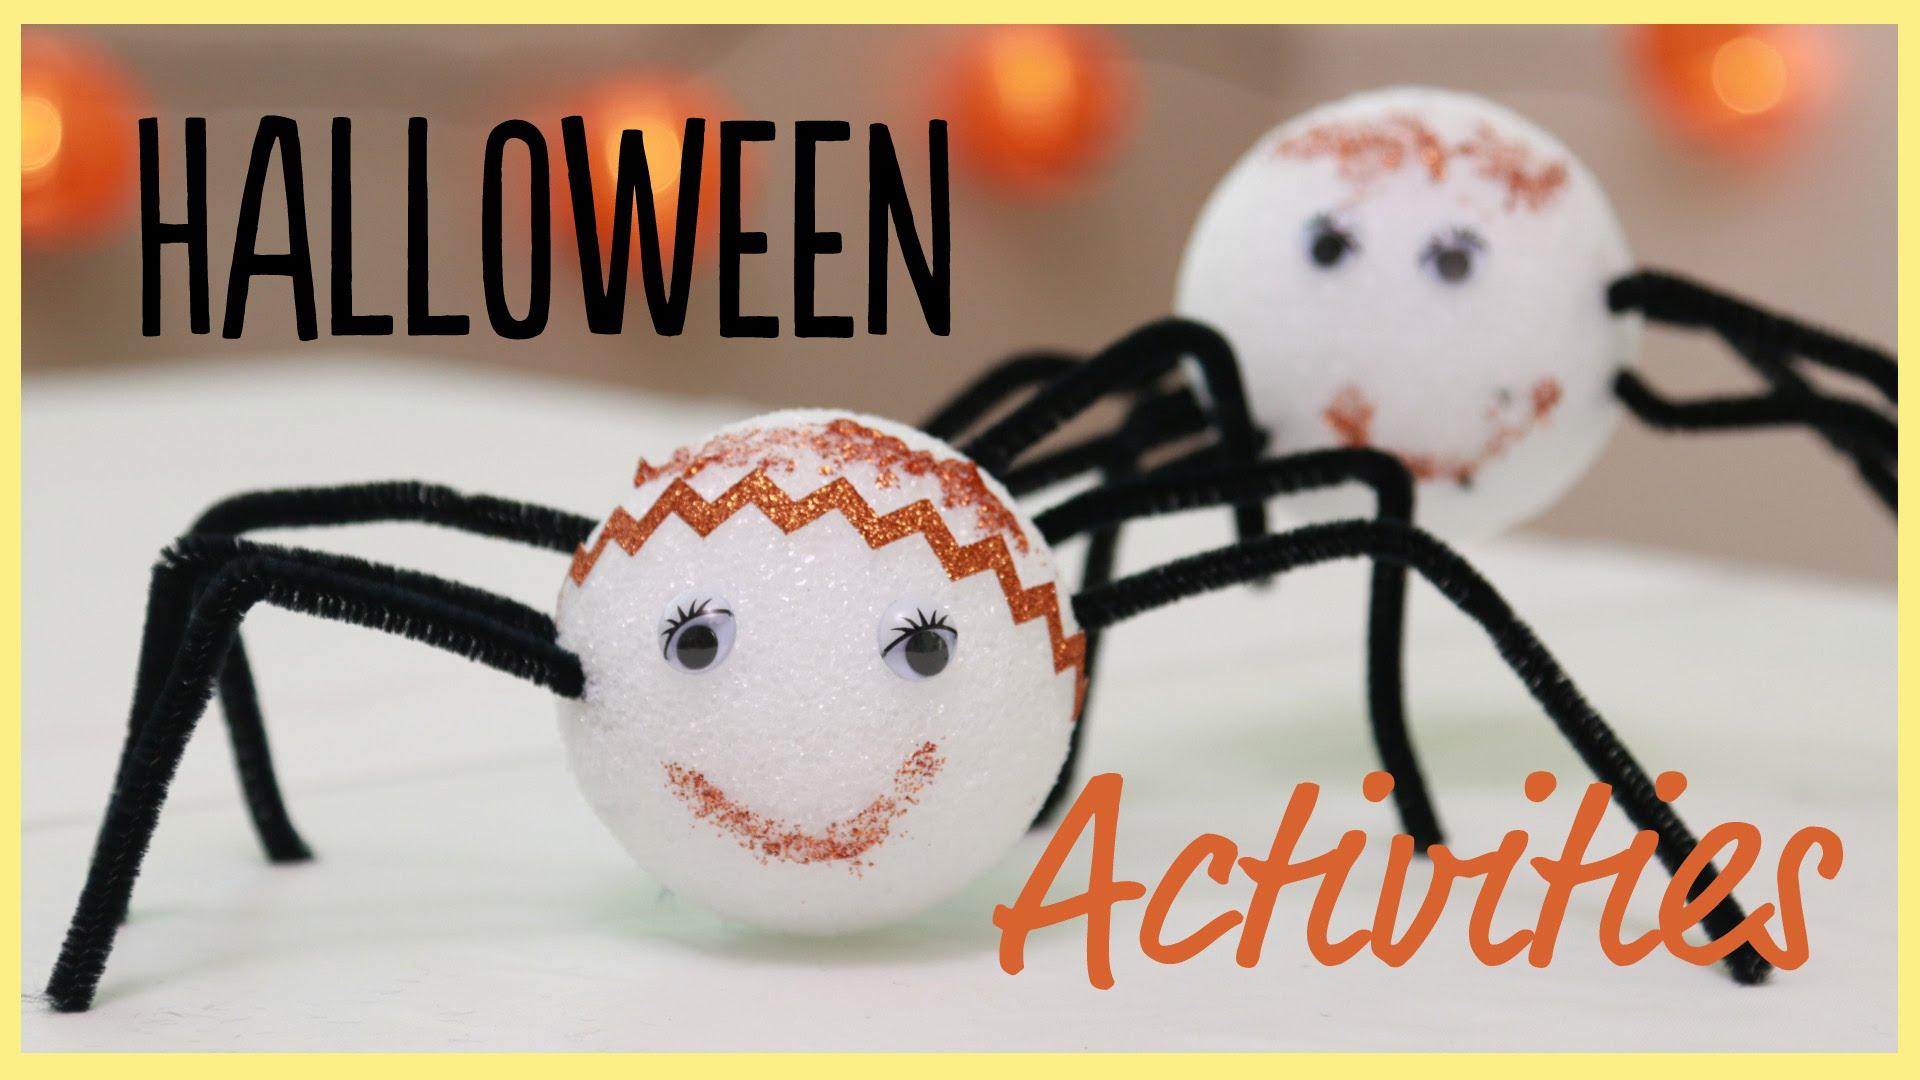 Tired of carving pumpkins that don't seem to last the week? Try these Halloween crafts that will last you all year! Fun Halloween home decor!